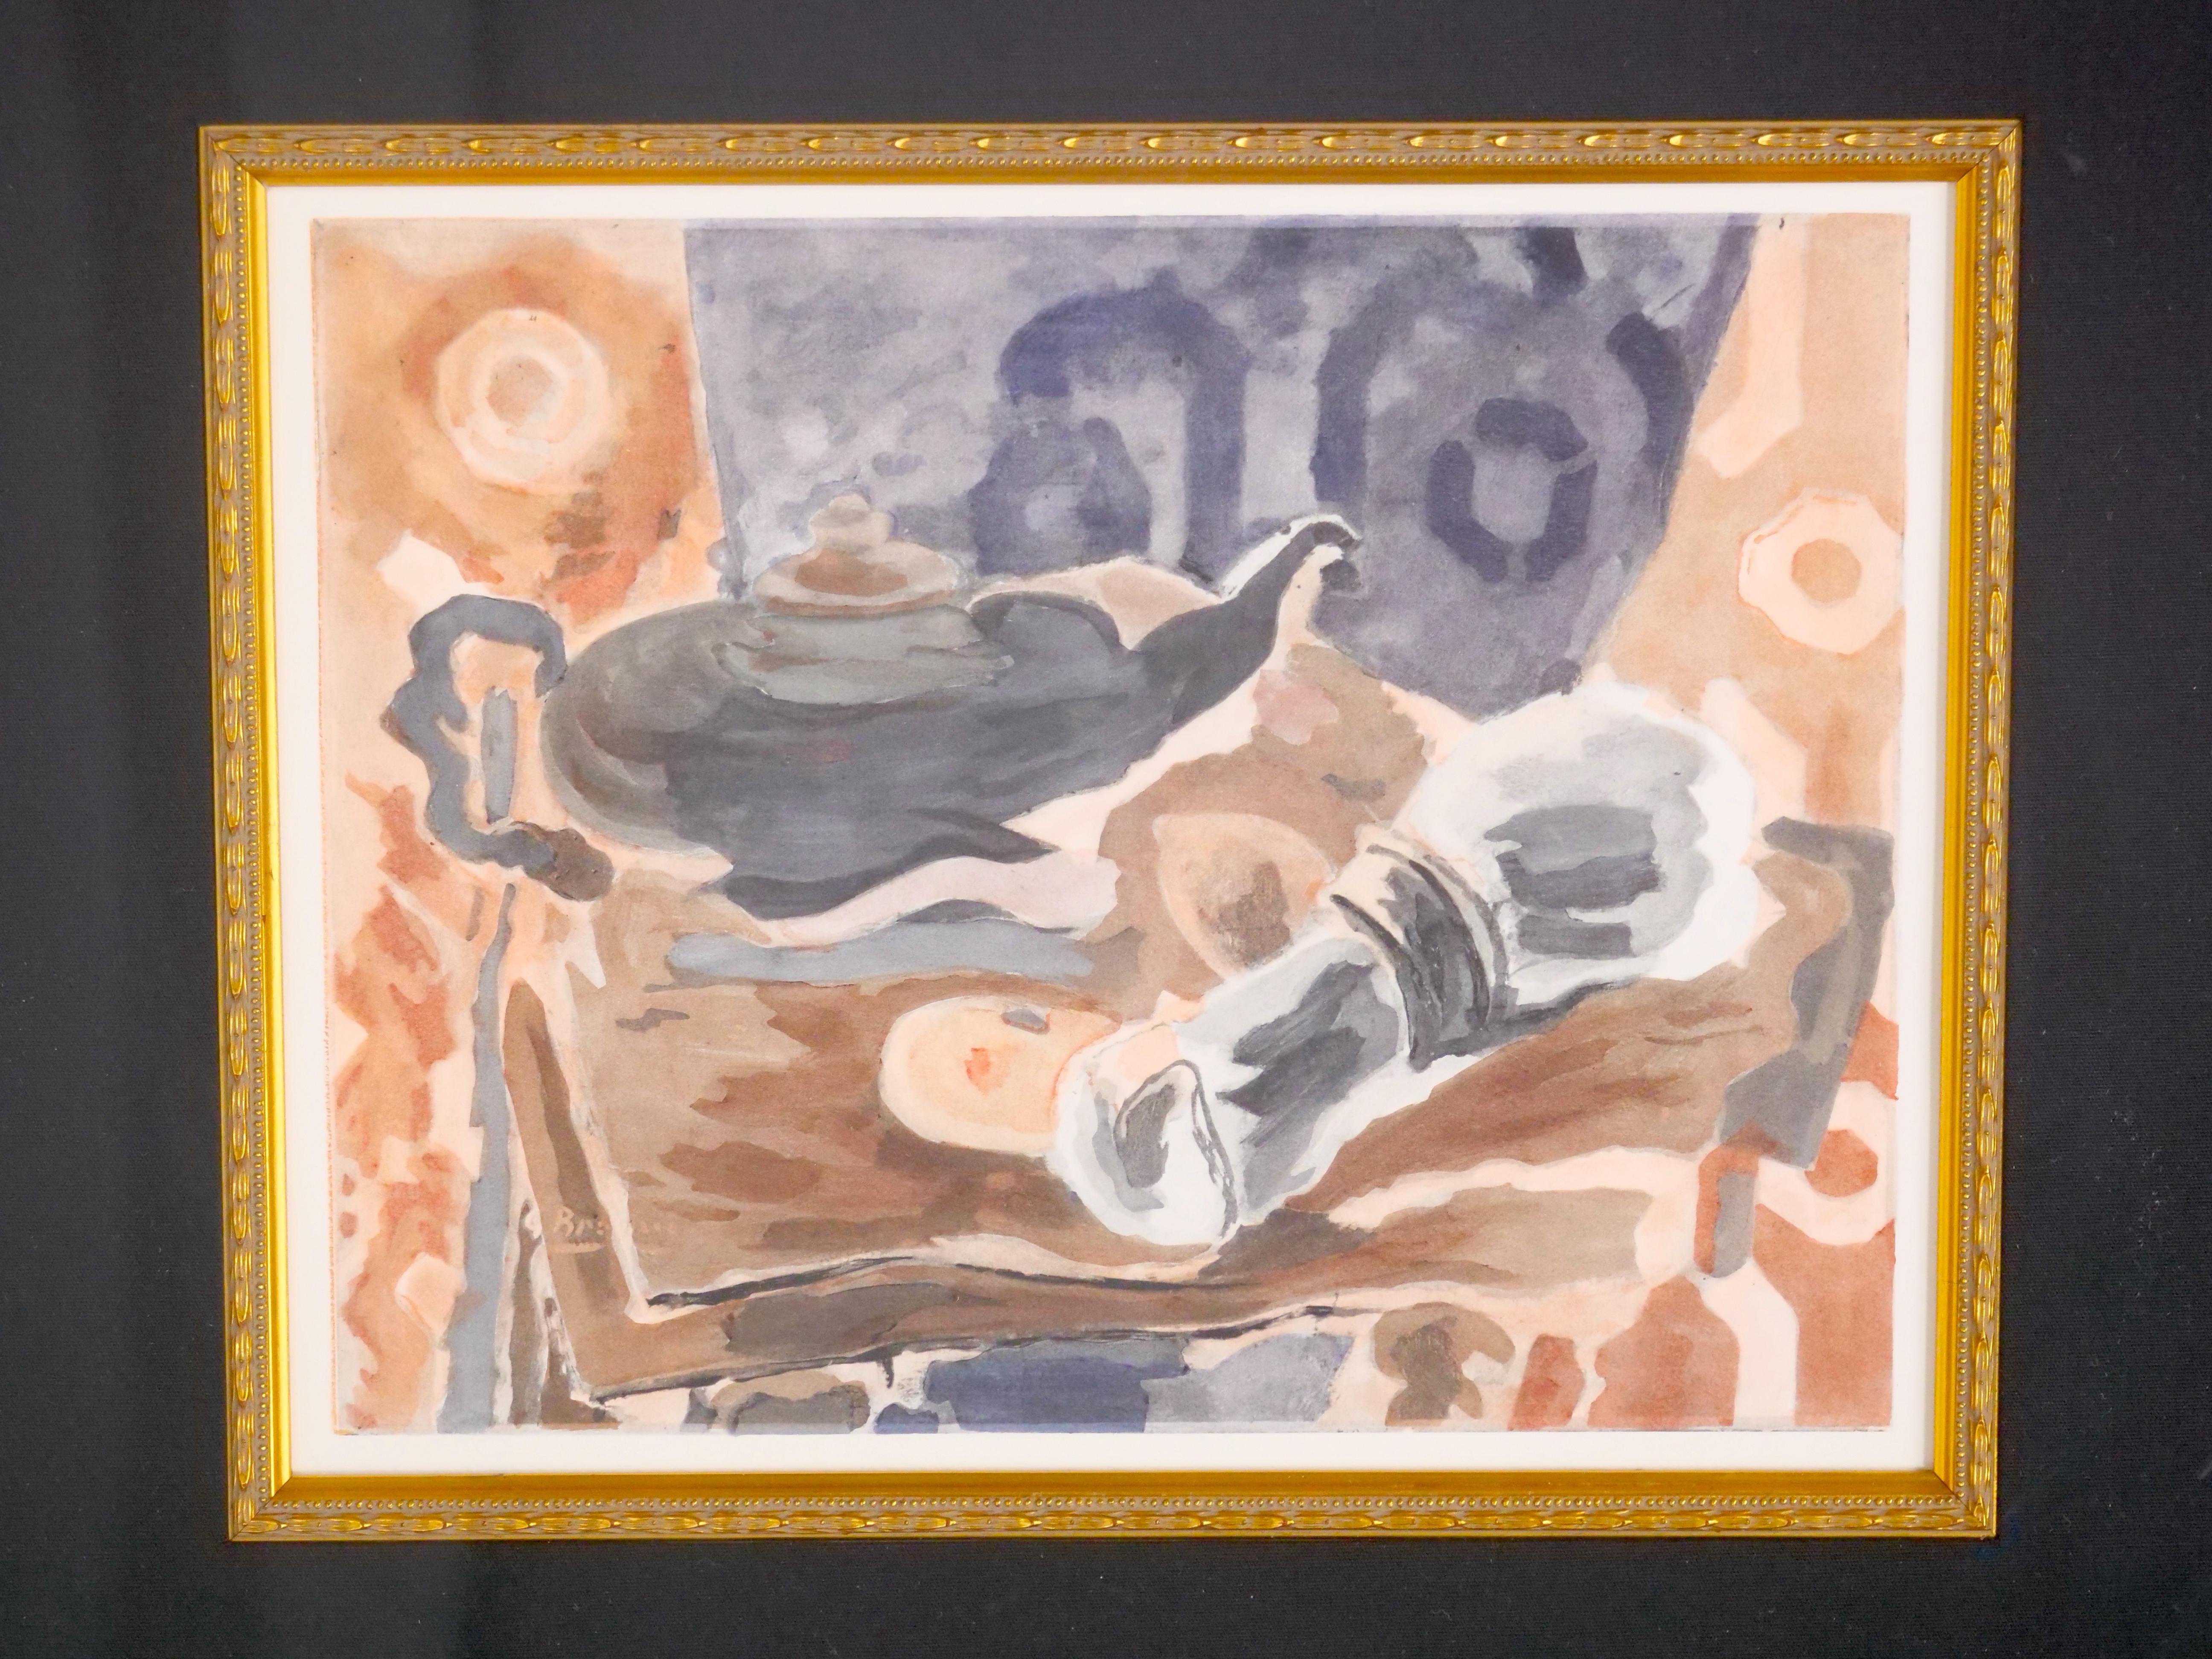 Elevate your art collection with this exquisite gilt wood-framed lithograph by the renowned artist George Braque titled 